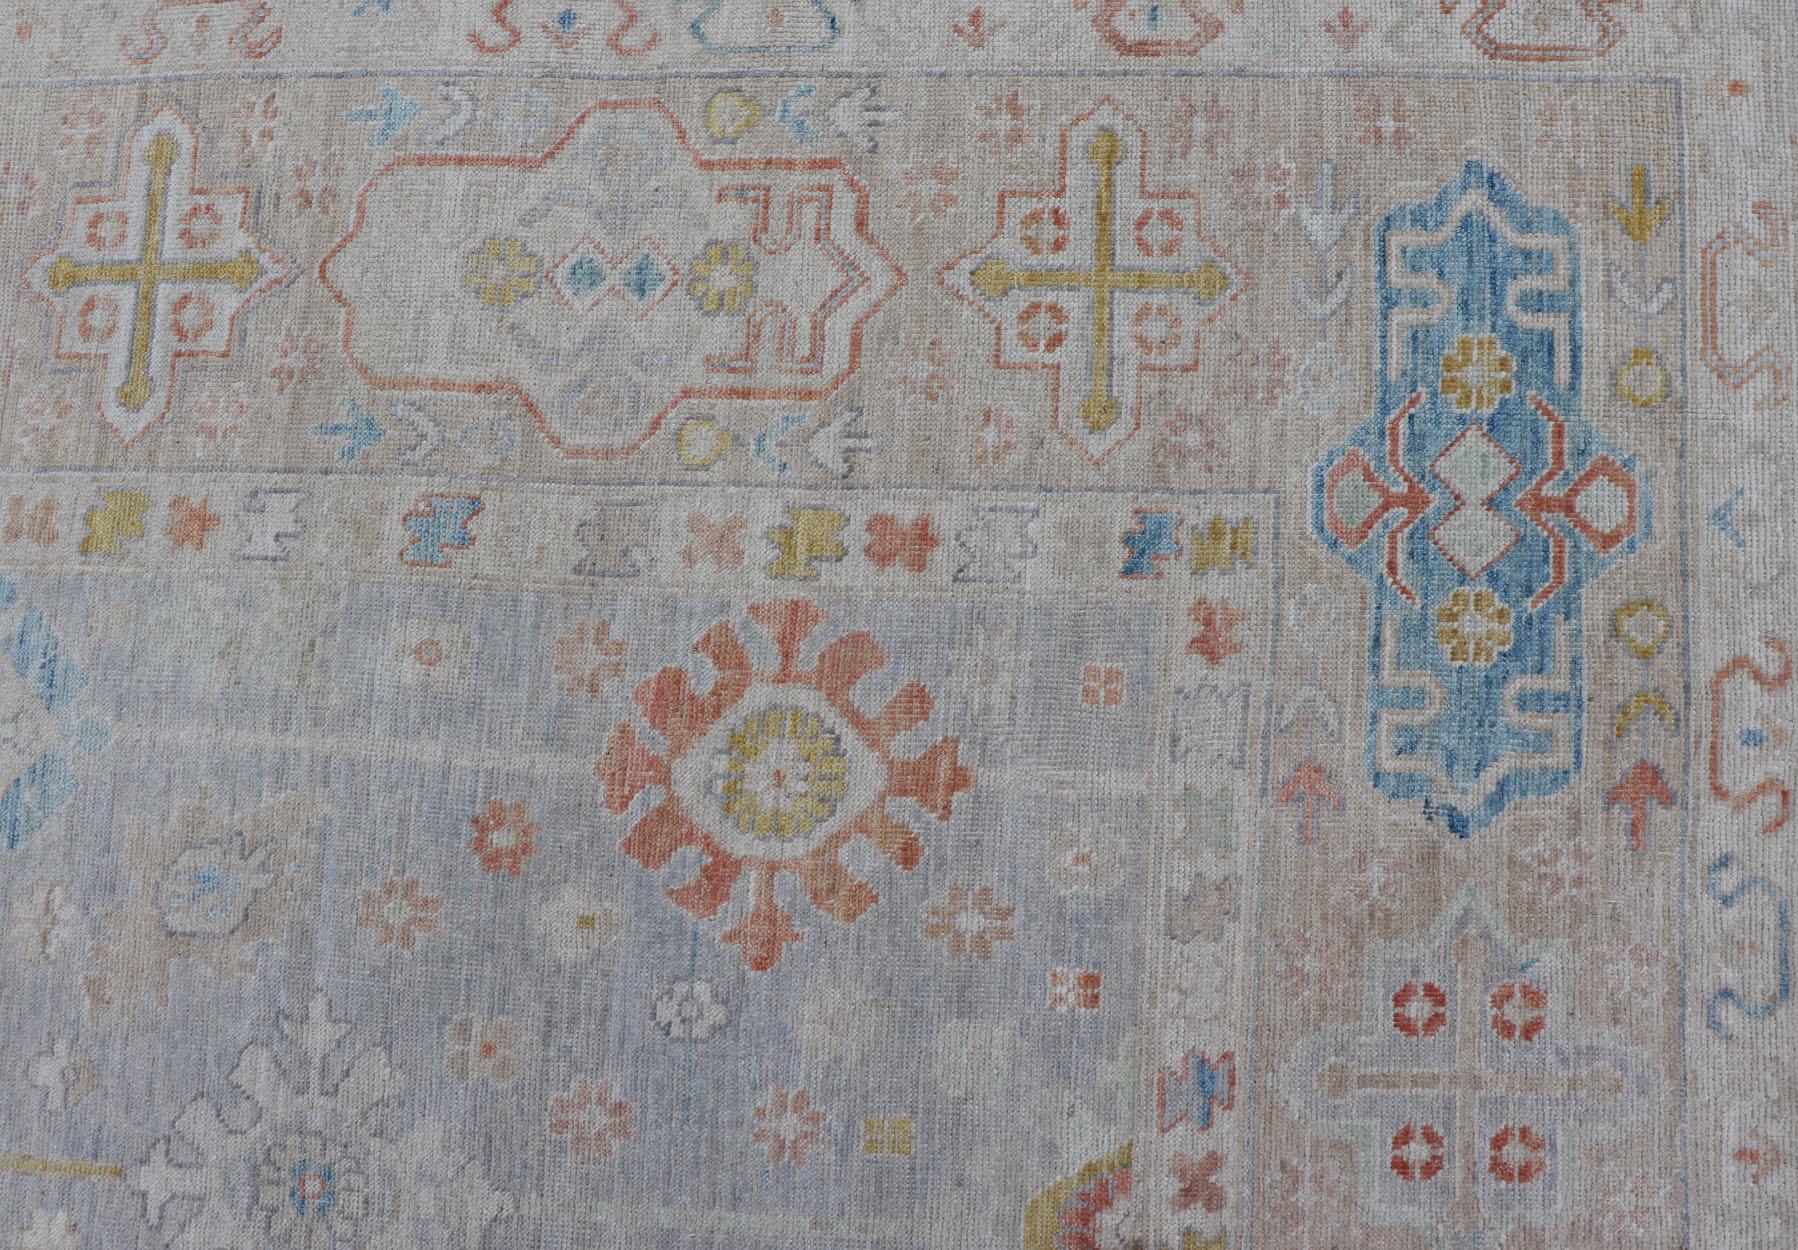 Modern Oushak rug hand knotted on a light gray field and rusty orange. Keivan Woven Arts; rug AWR-3719 Country of Origin: Afghanistan Type: Oushak Design: Mosaic Floral, 

The border and field are covered in floral-like motifs filled with colors